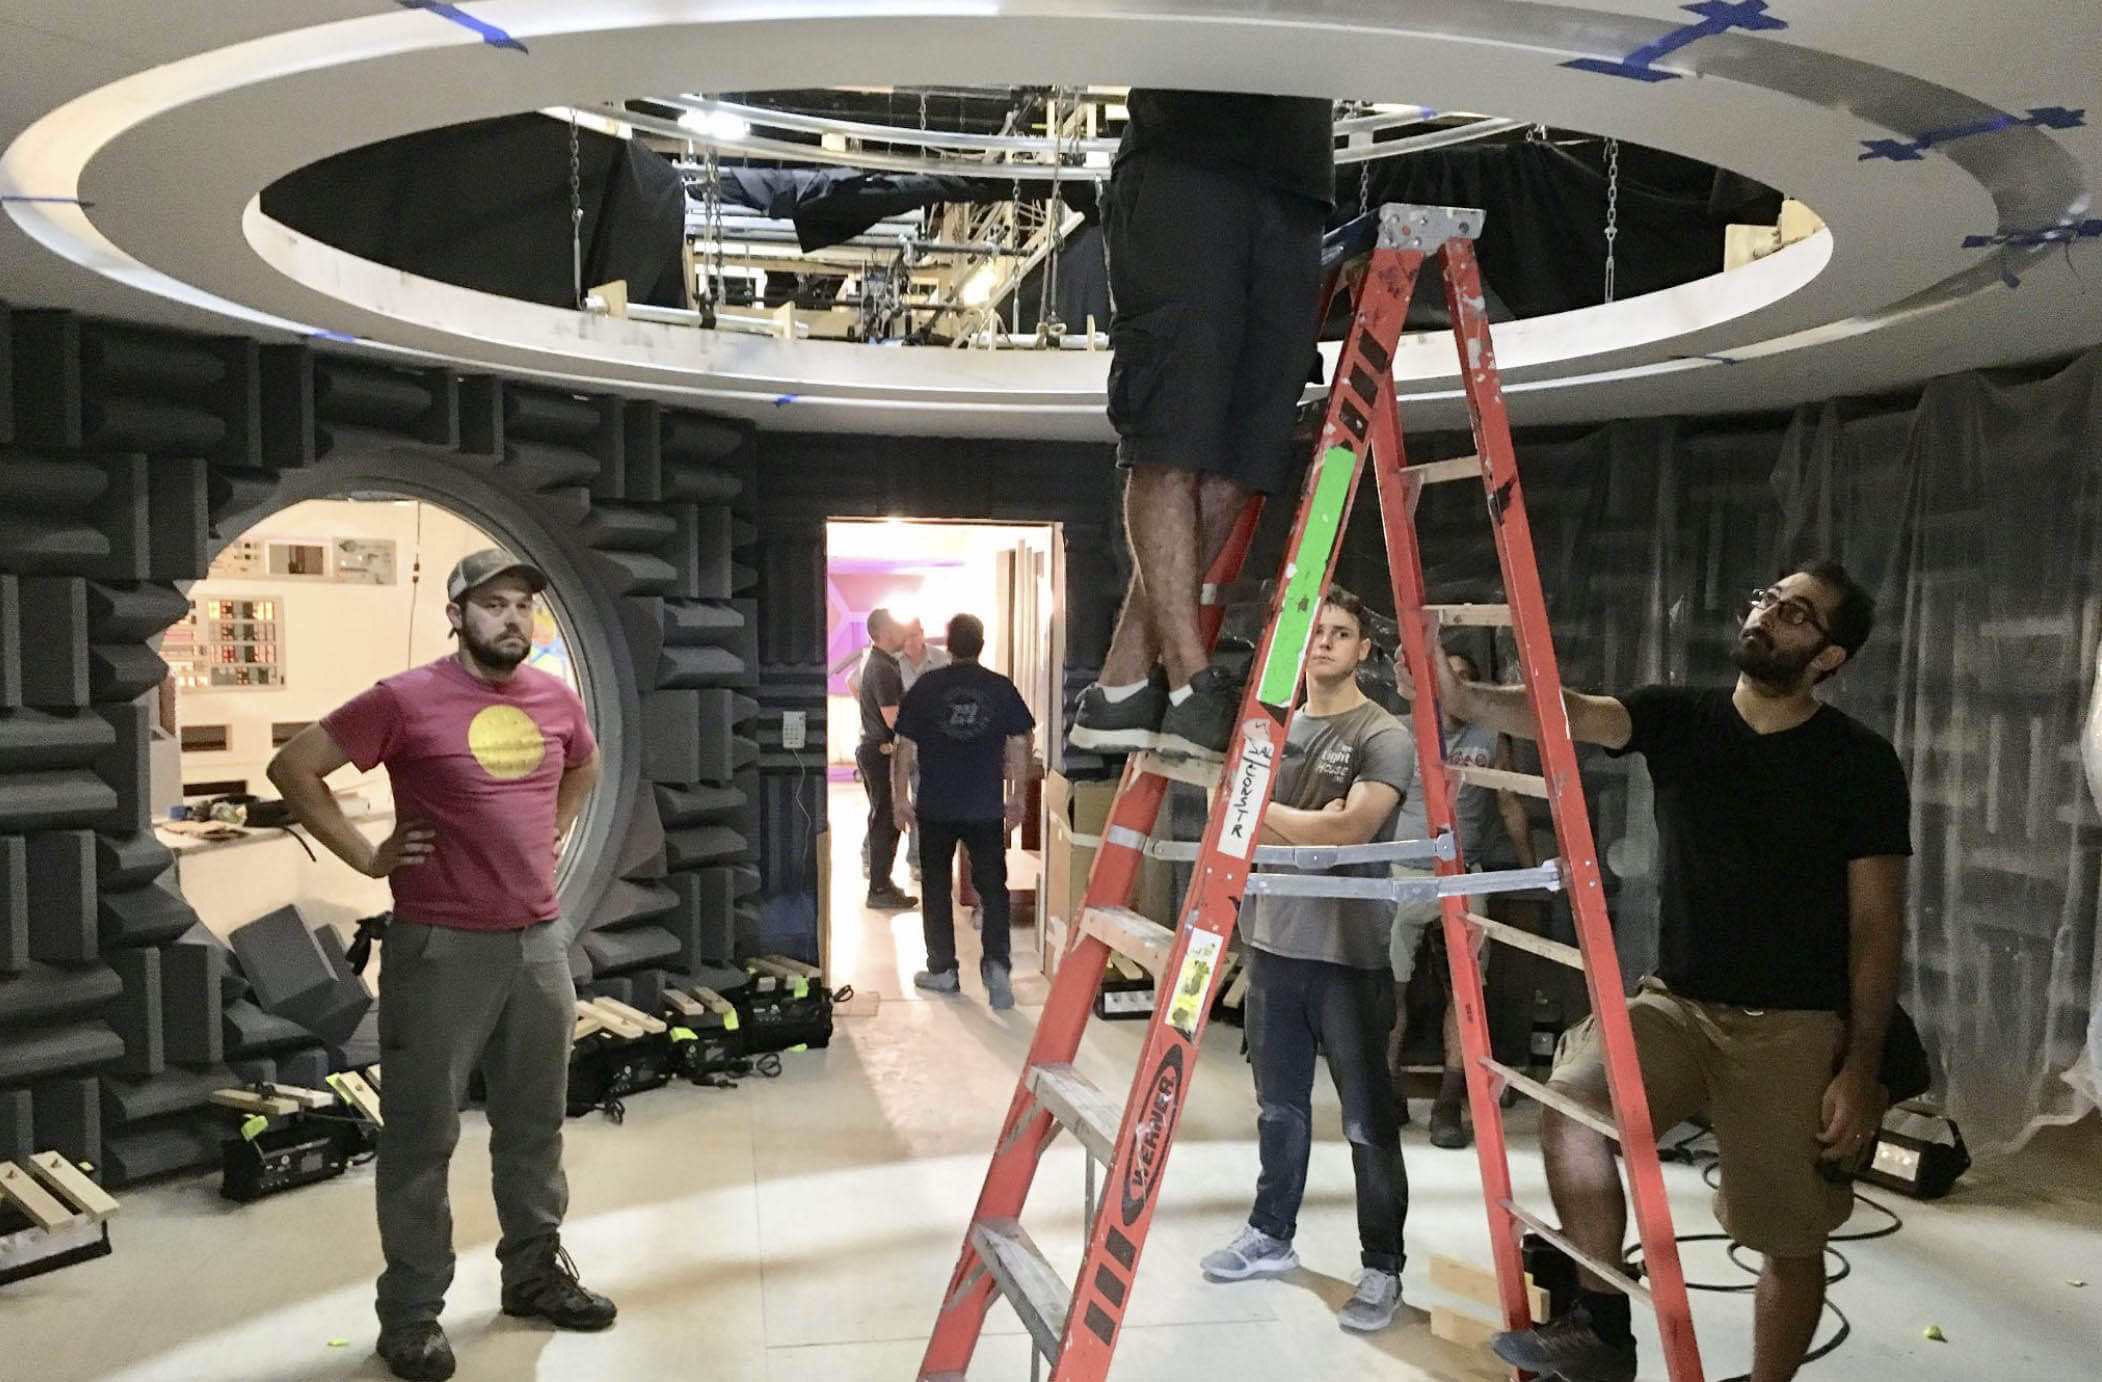 Building the set of Maniac (Netflix) - Set Decoration in Film & Photography with Lydia Marks